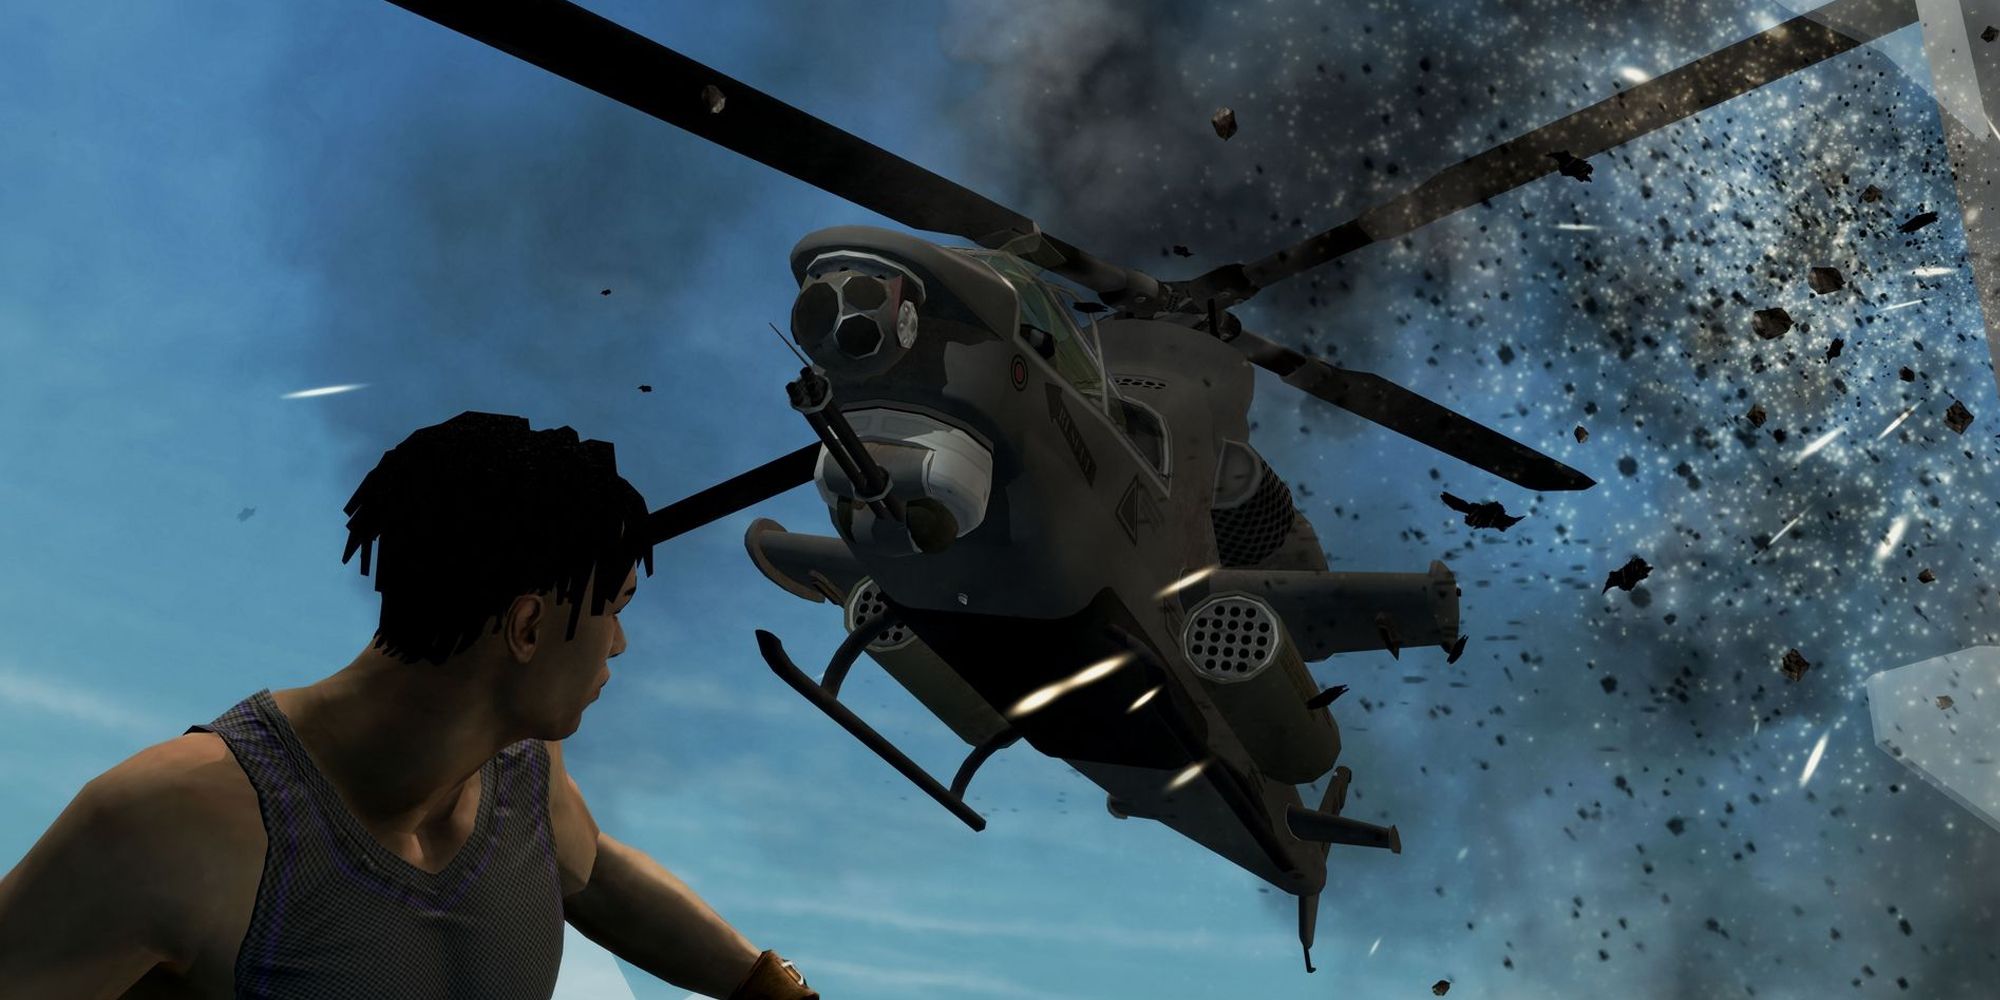 Saints Row 2 helicopter crashing into The Boss as he looks behind him